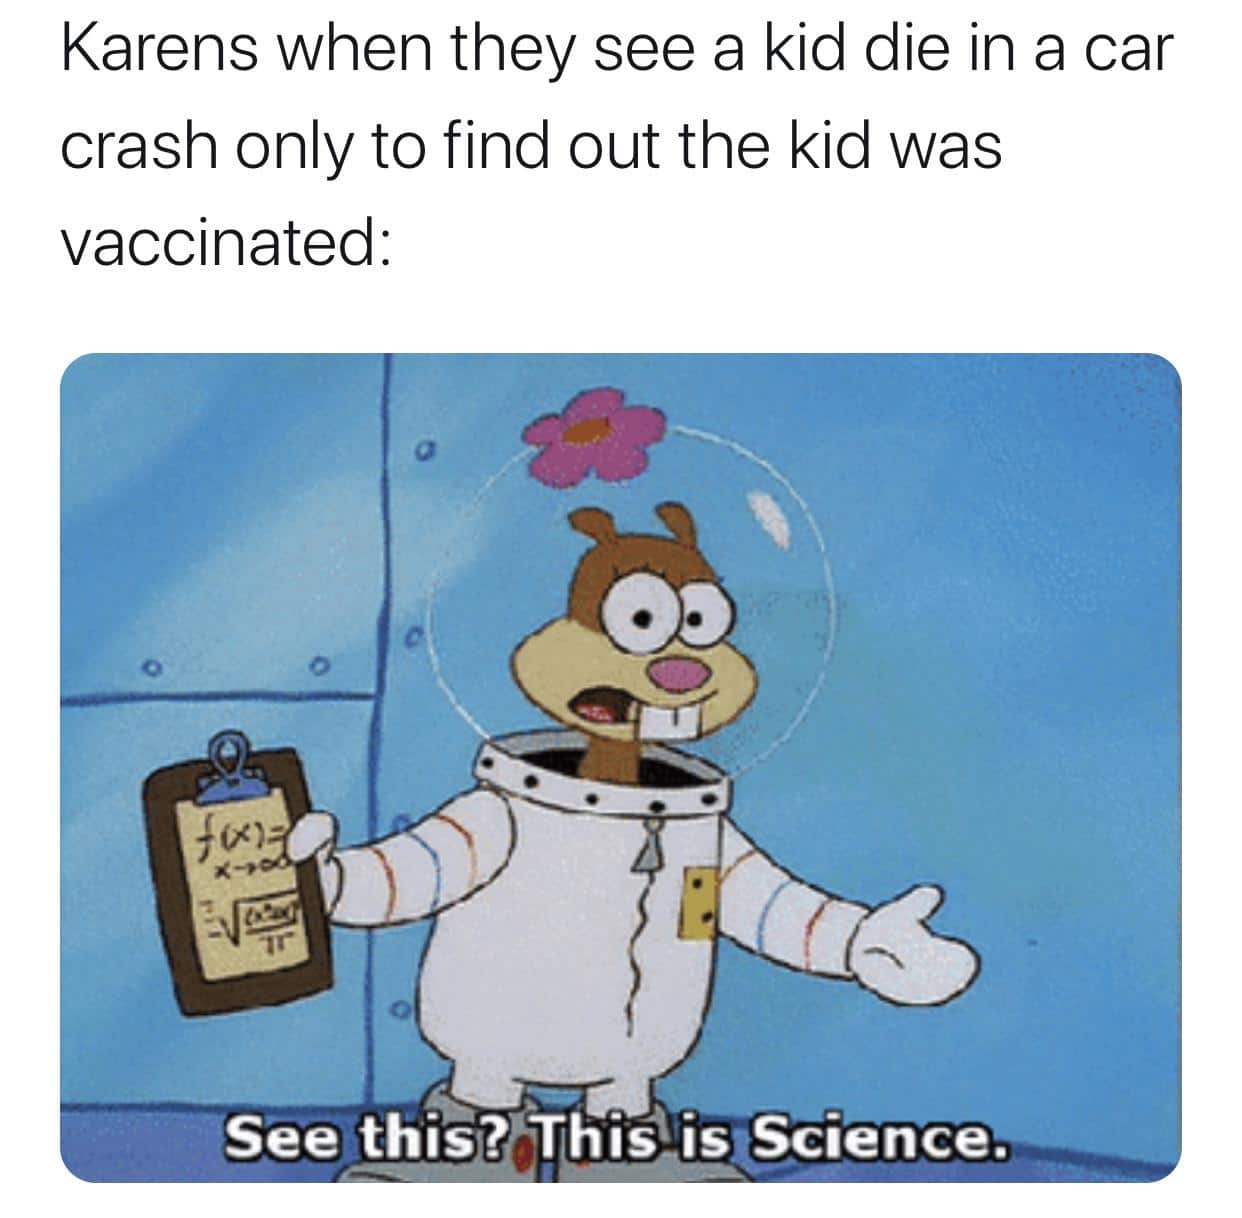 Spongebob, WaHt, Uo, Ot VaCinnEs Spongebob Memes Spongebob, WaHt, Uo, Ot VaCinnEs text: Karens when they see a kid die in a car crash only to find out the kid was vaccinated: See this@LTbiyisqScience. 